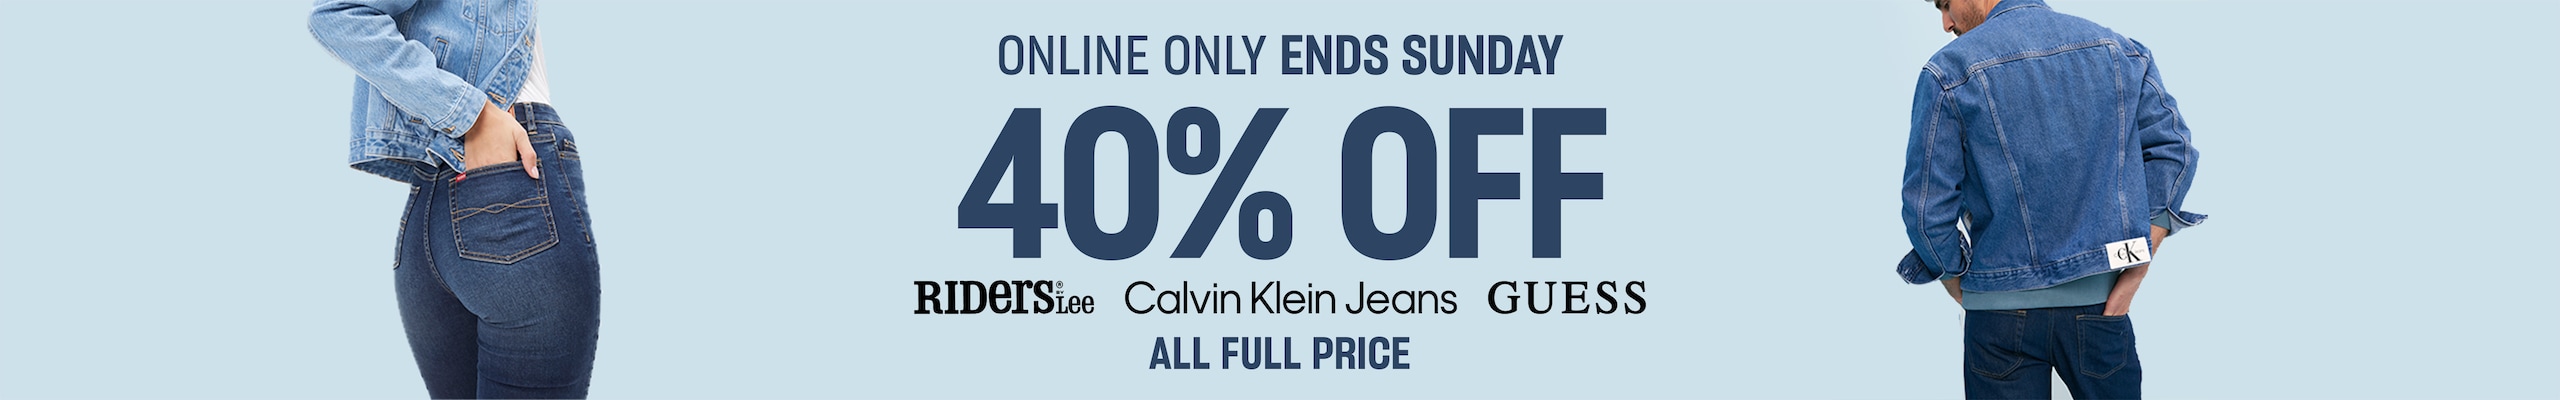 Online only, ends Sunday. 40% off Riders by Lee, Calvin Klein Jeans, GUess. All full price